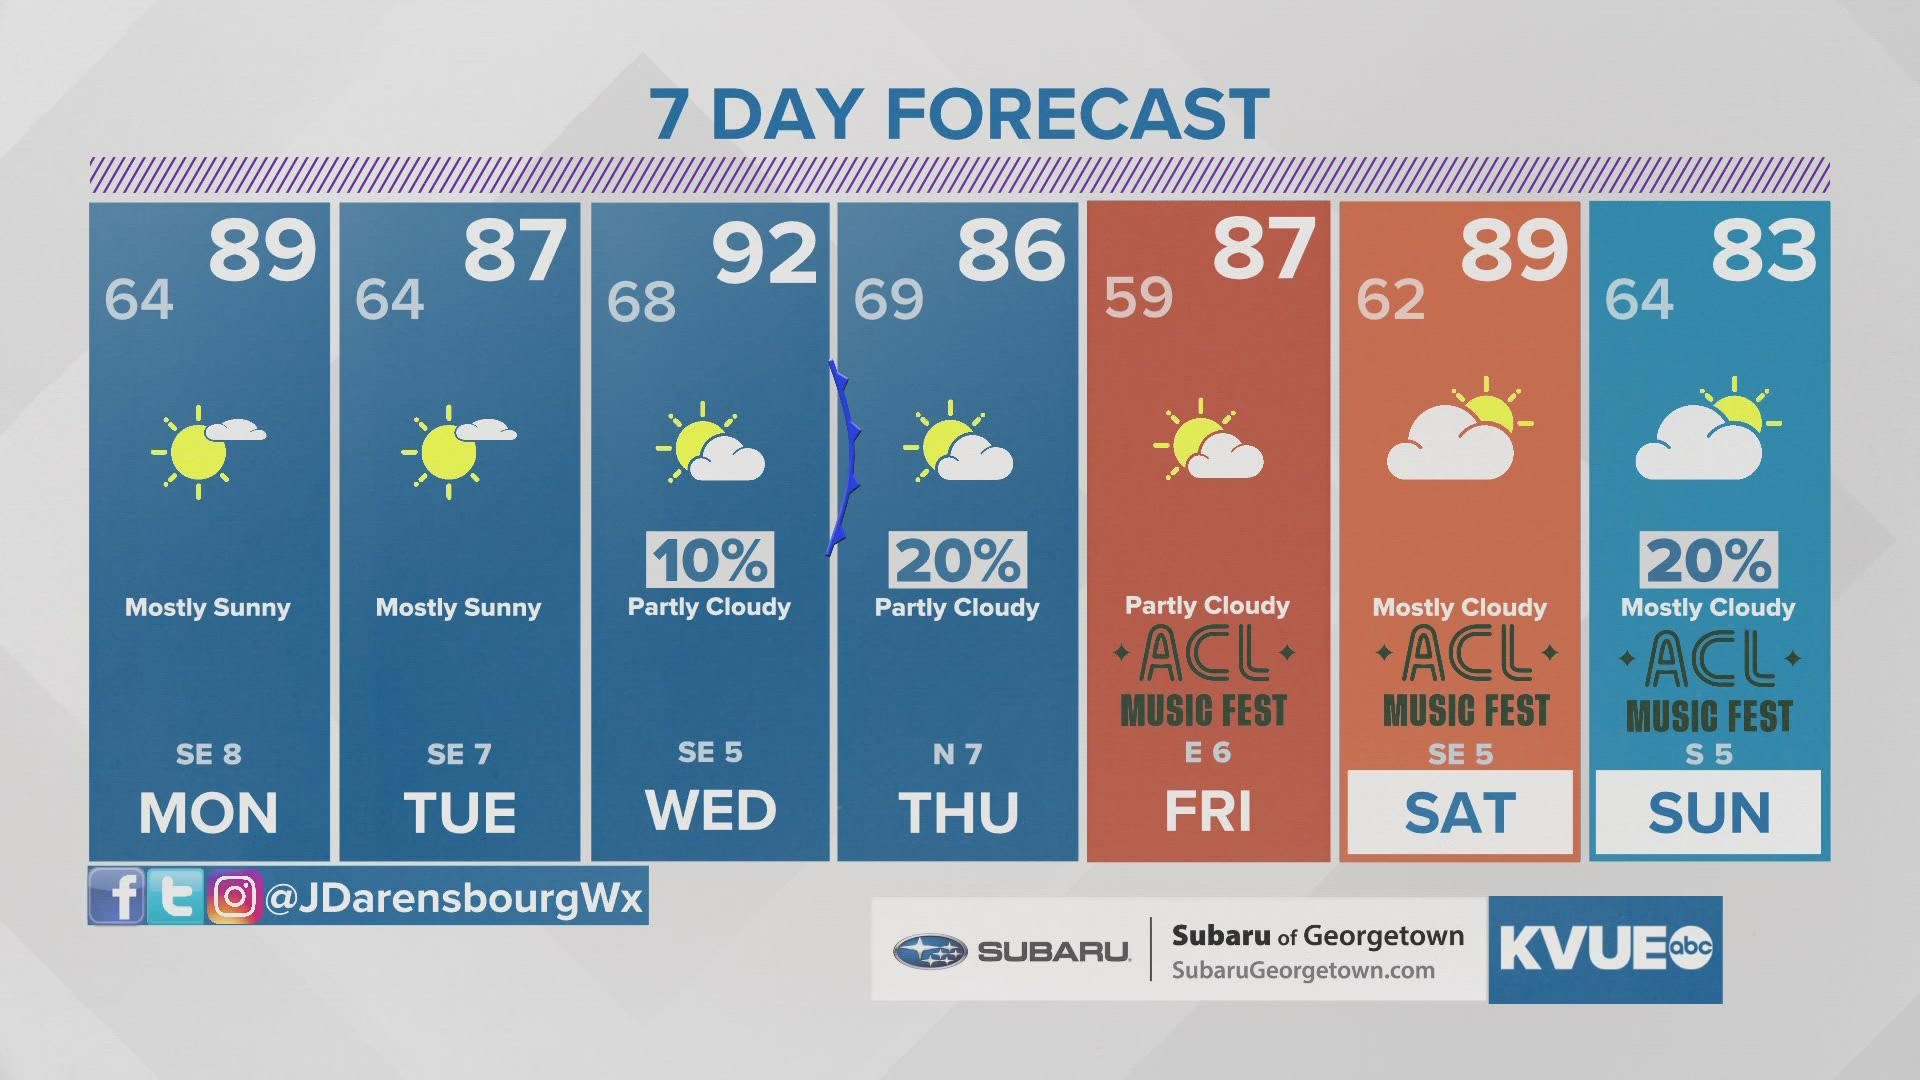 Dry most of next week but small rain chances return